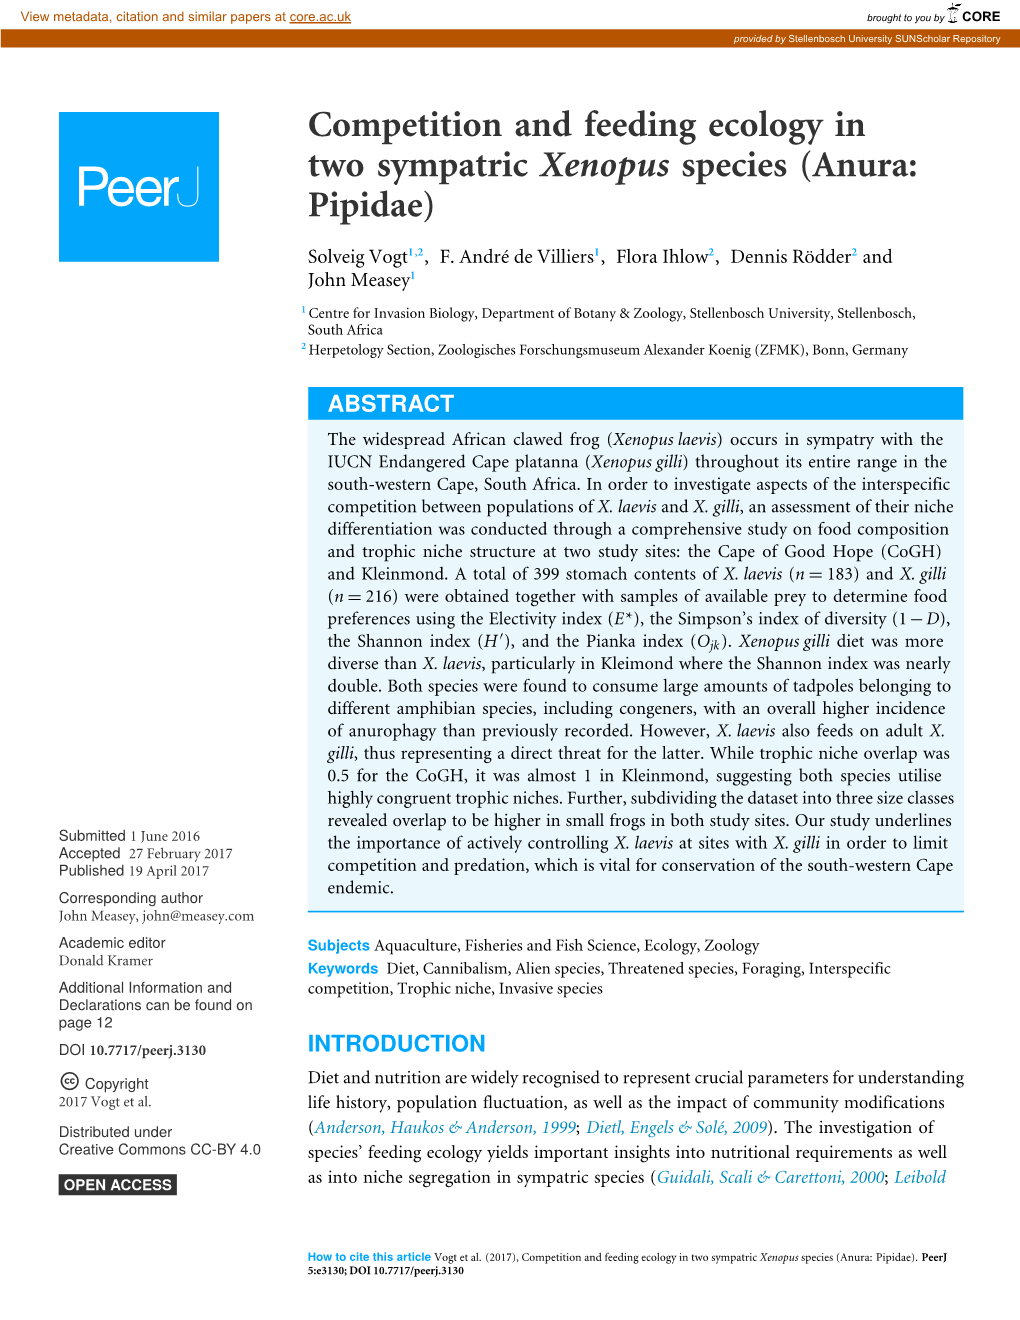 Competition and Feeding Ecology in Two Sympatric Xenopus Species (Anura: Pipidae)